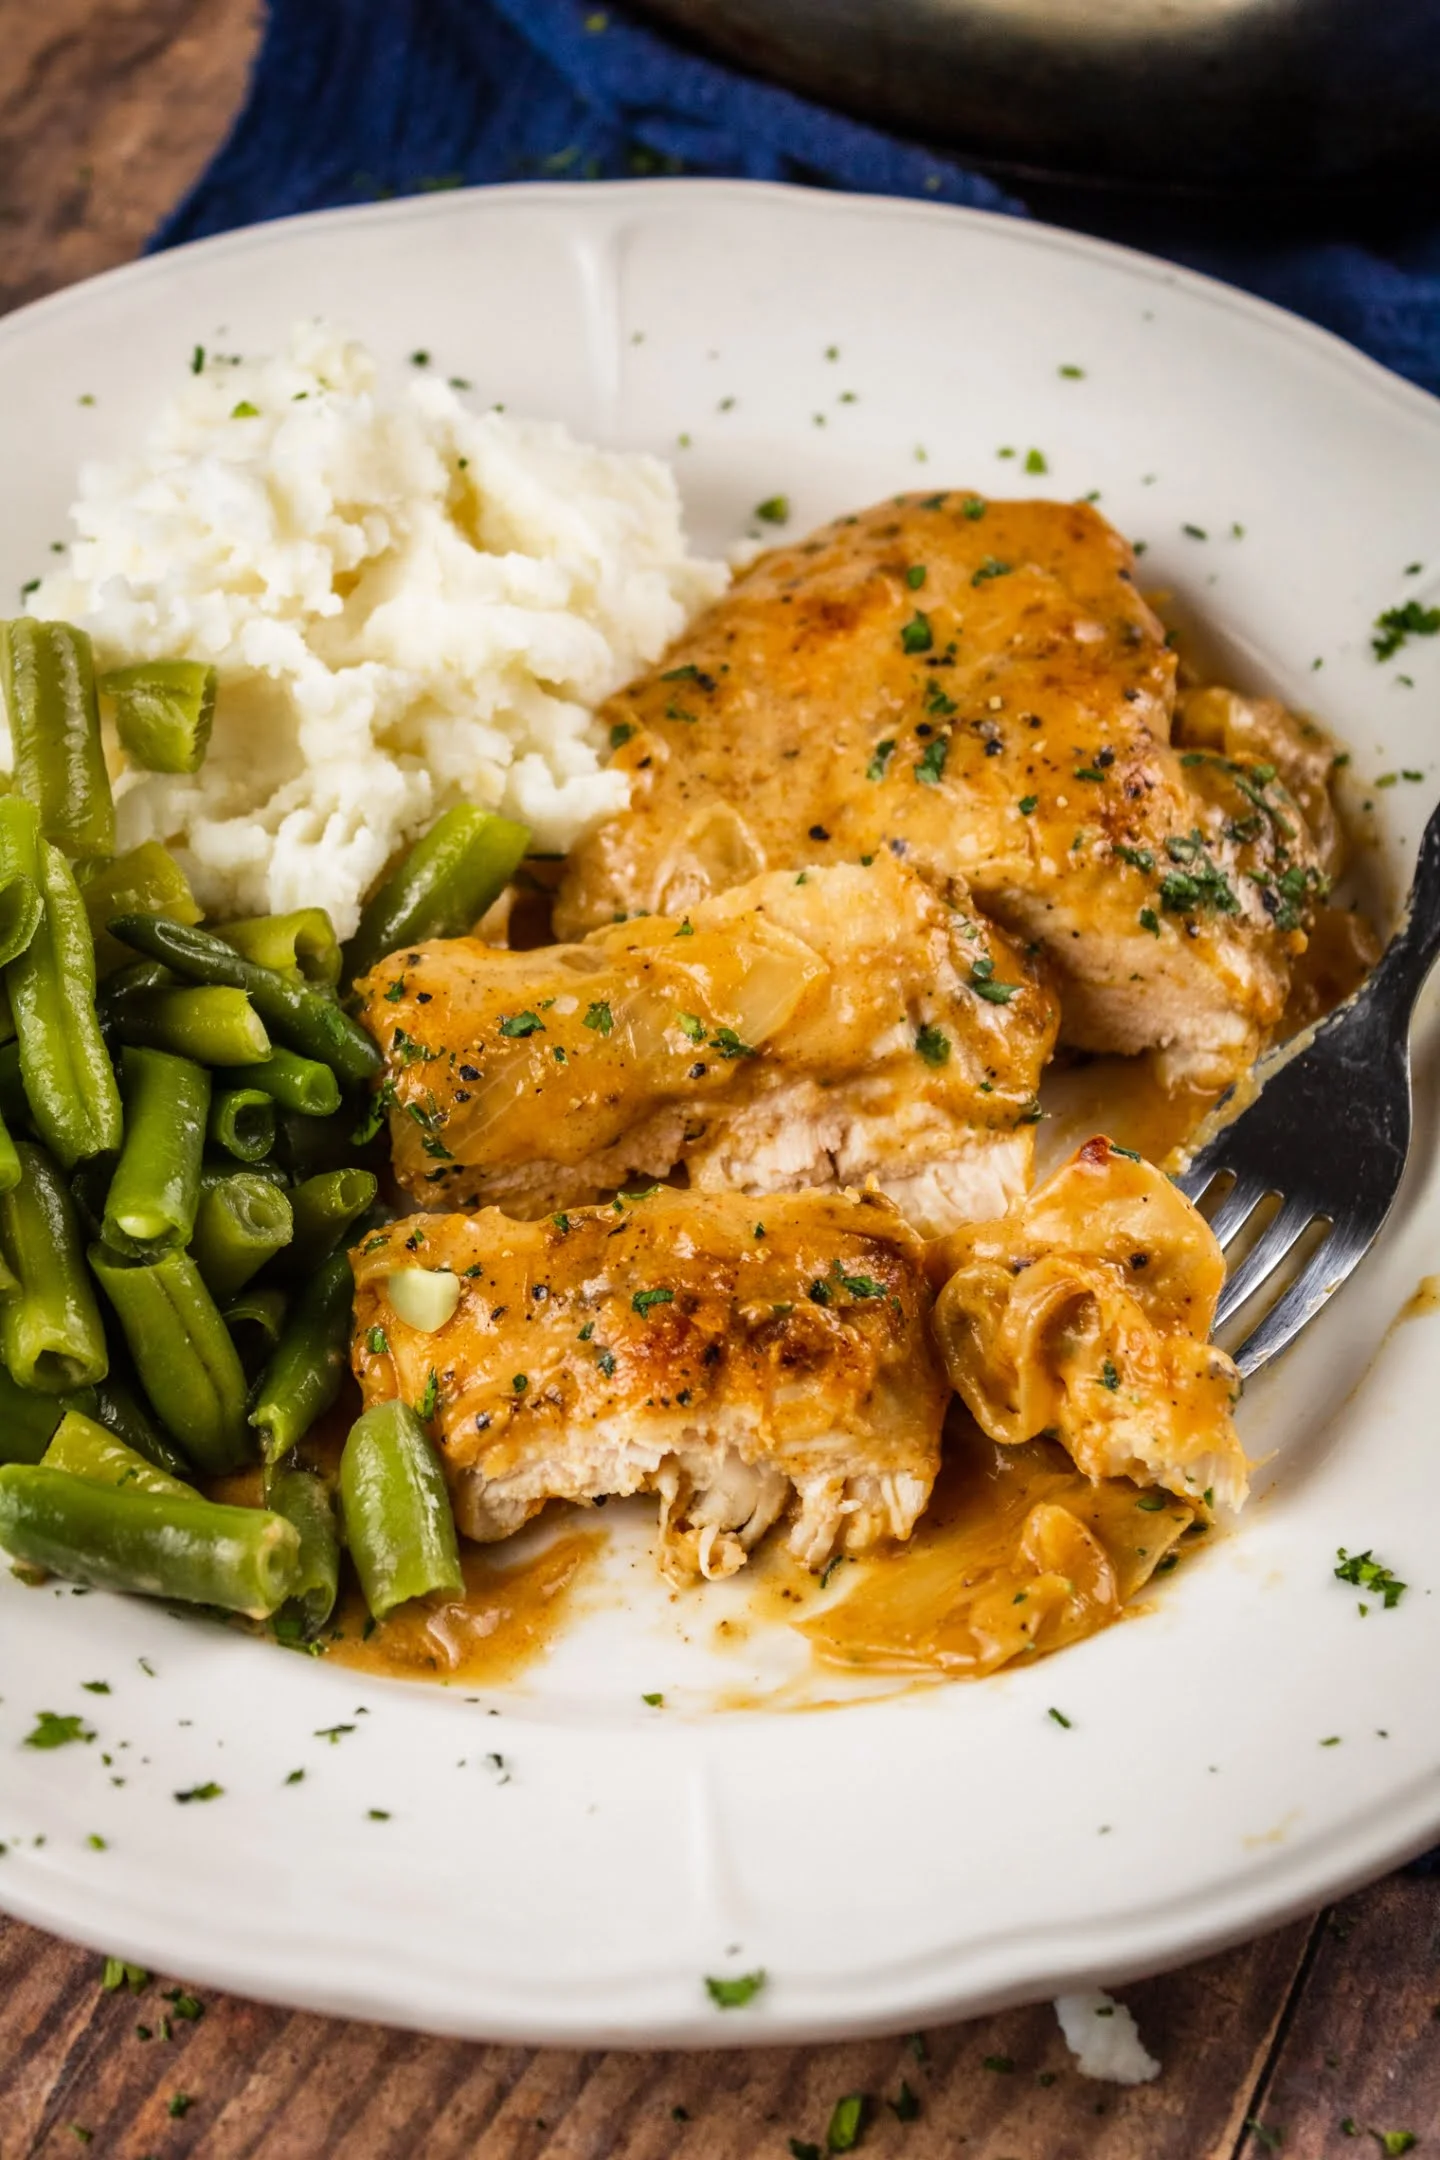 smothered chicken with mashed potato and beans - serving with mashed potato and green beans